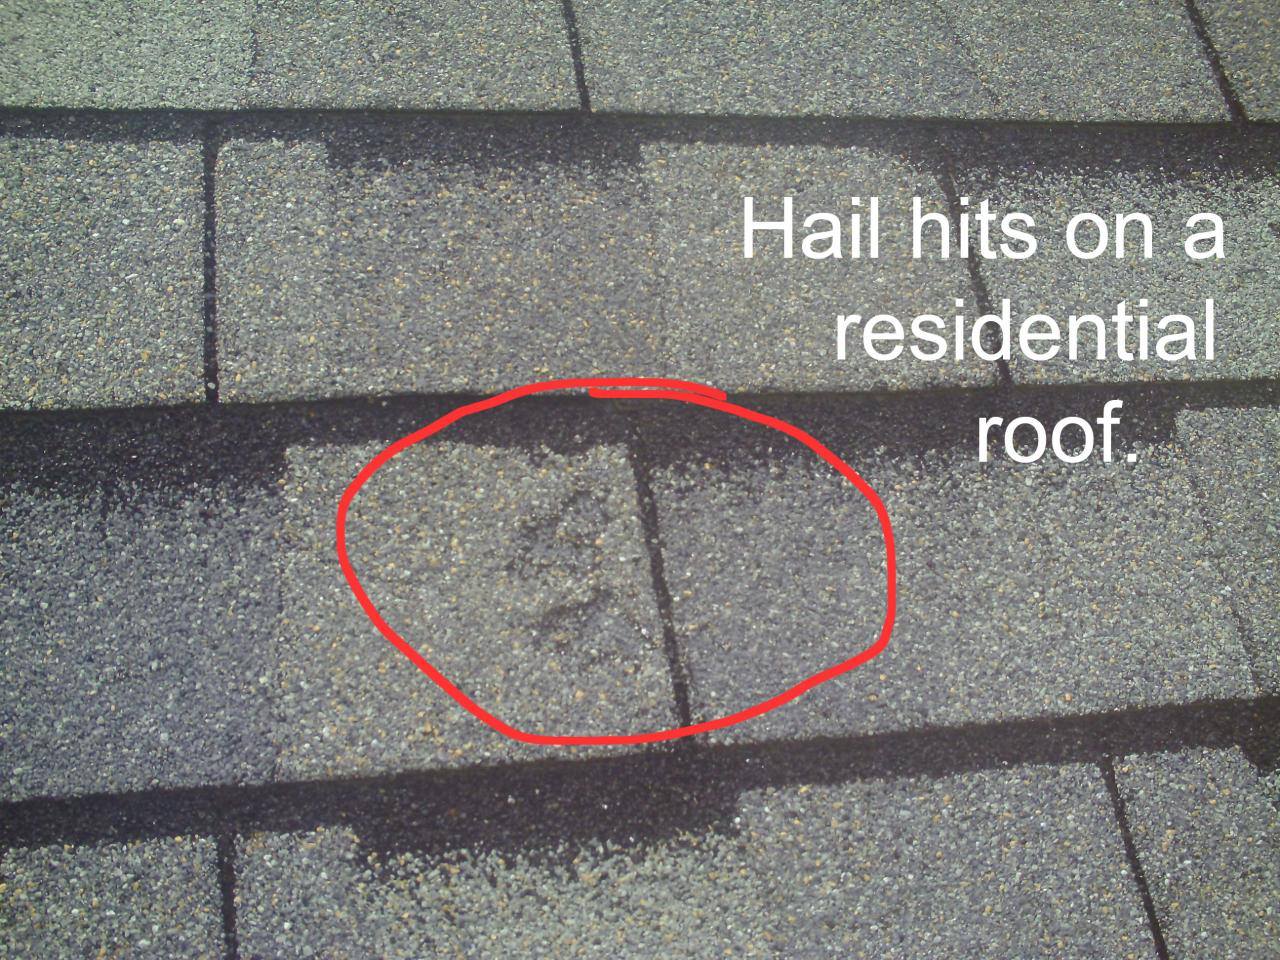 have a property insurance claim? General contractor in Prior Lake fixes hail damage on roof